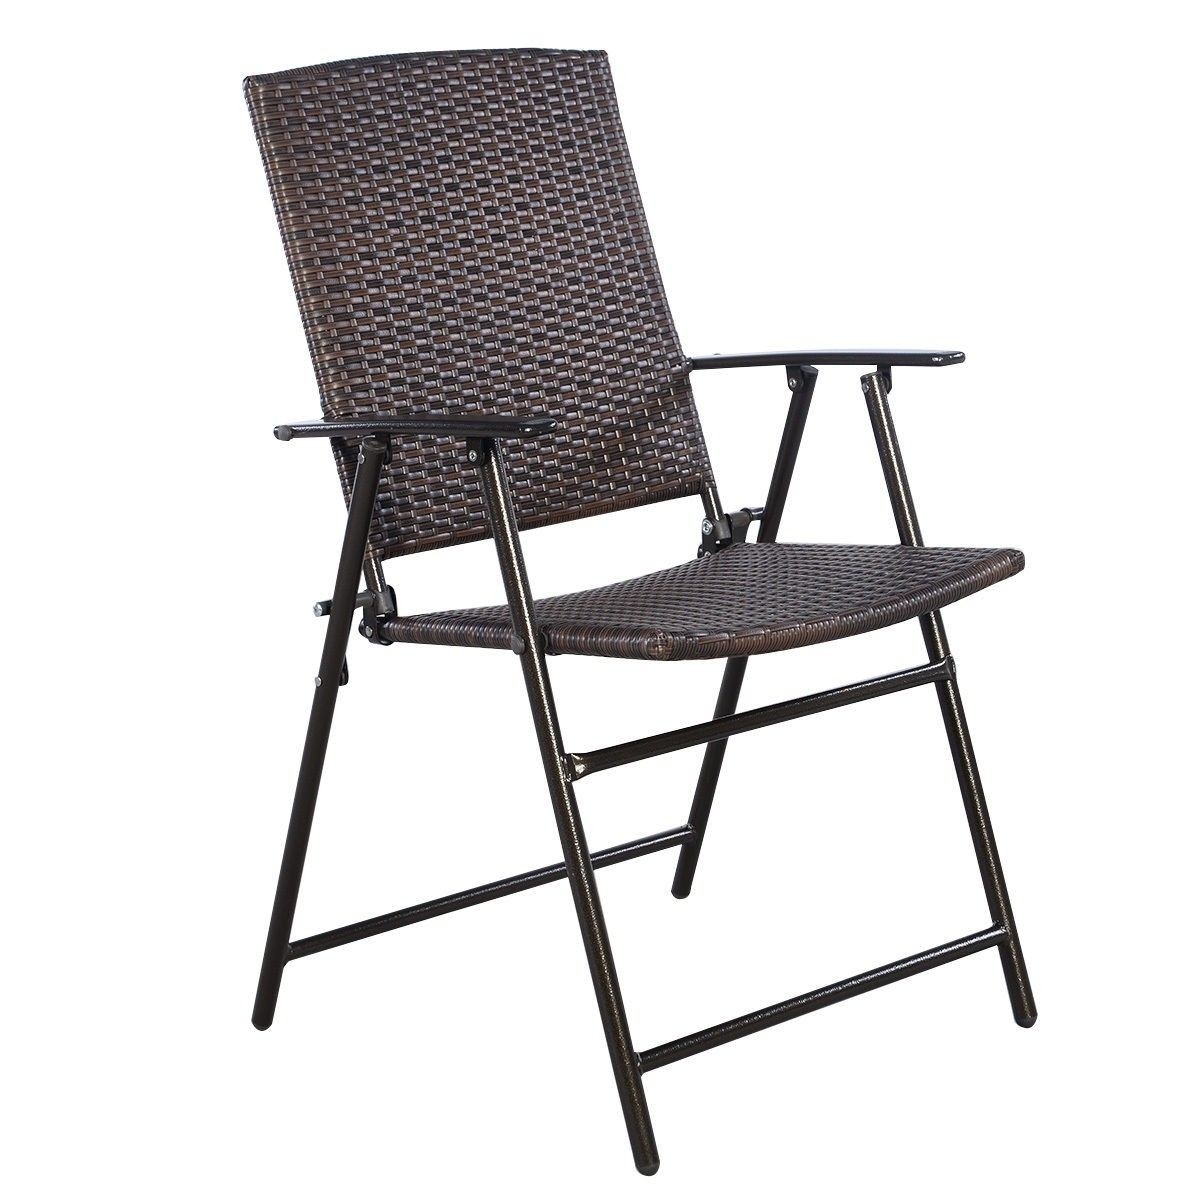 Set of 4 rattan folding chair outdoor folding chairs